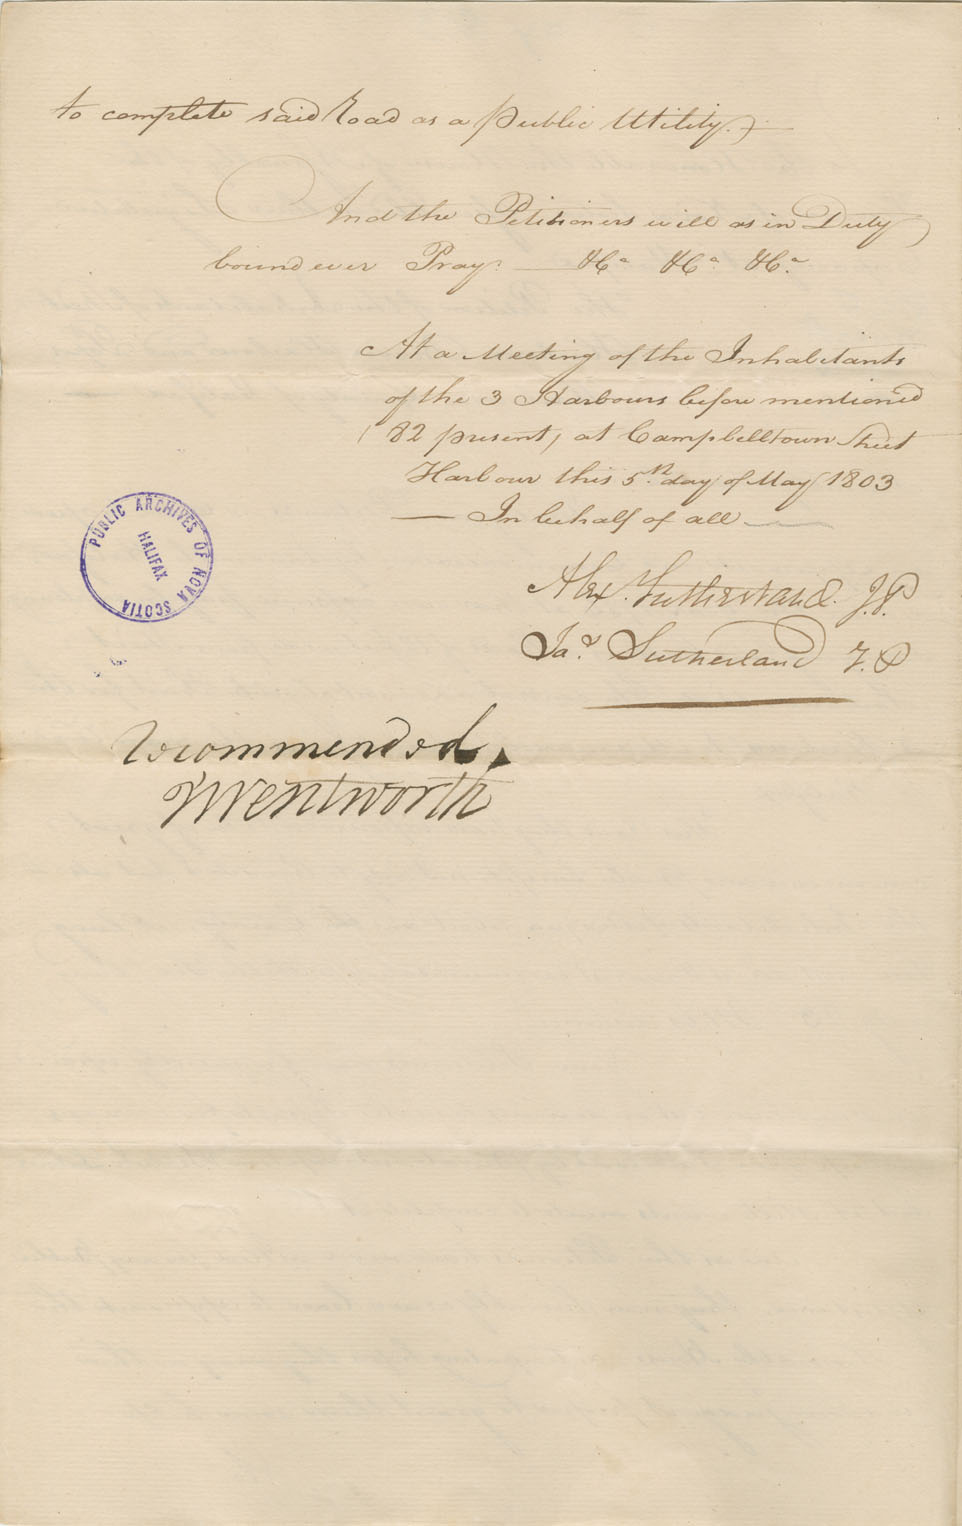 assembly : Petition of Alexander and James Sutherland on behalf of inhabitants of Sheet Harbour, Beaver Harbour and Pope’s Harbour, asking for aid in o